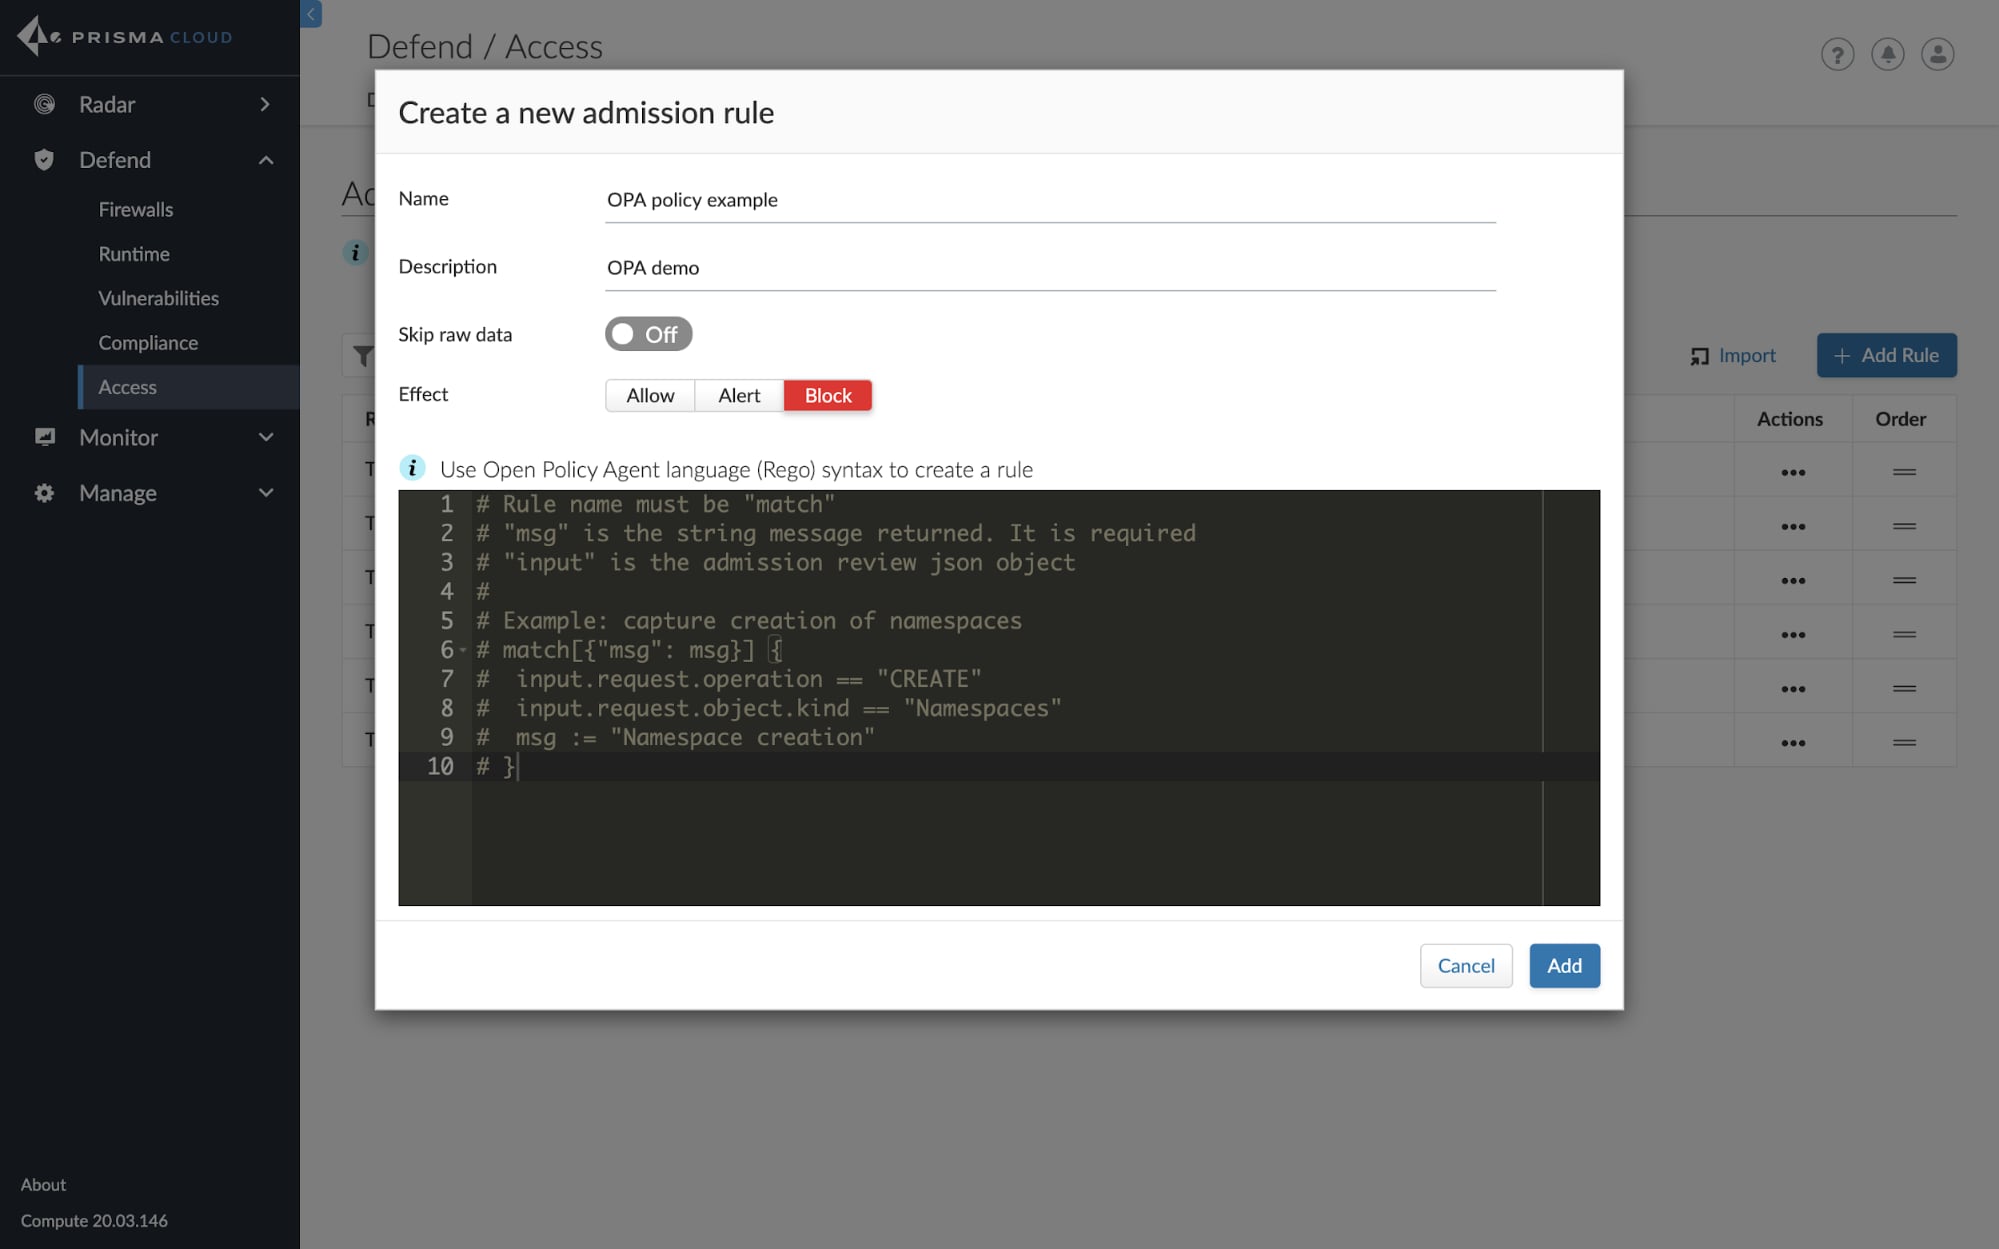 A screenshot showing how to create a new admission rule in Prisma Cloud. 